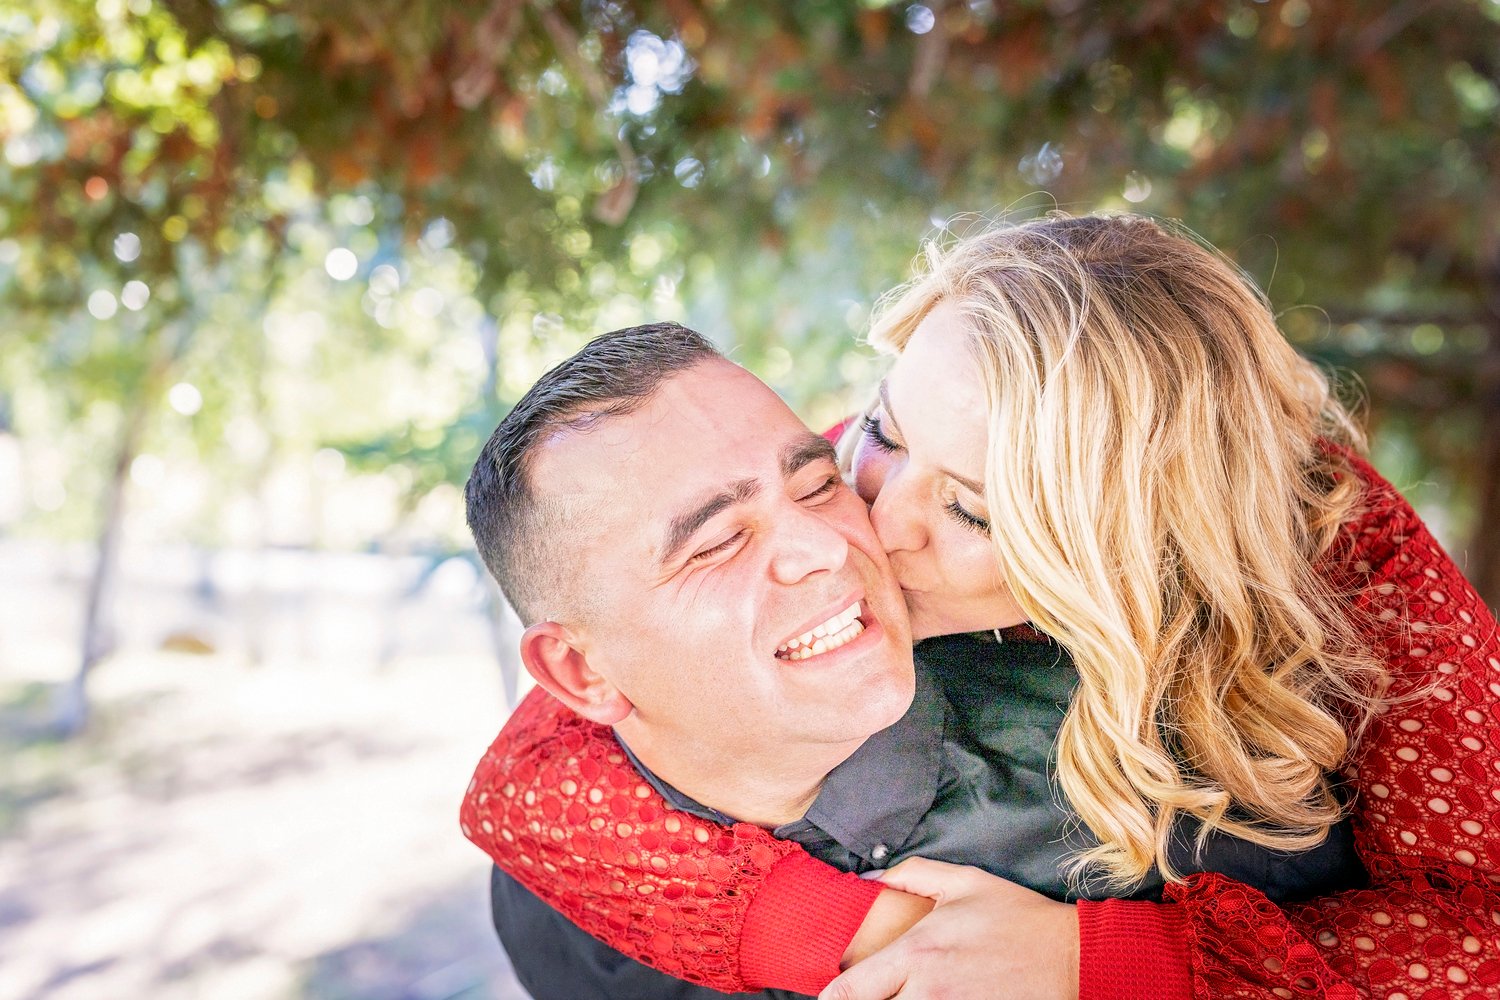 woman kissing her fiance on the cheek while he smiles back at her